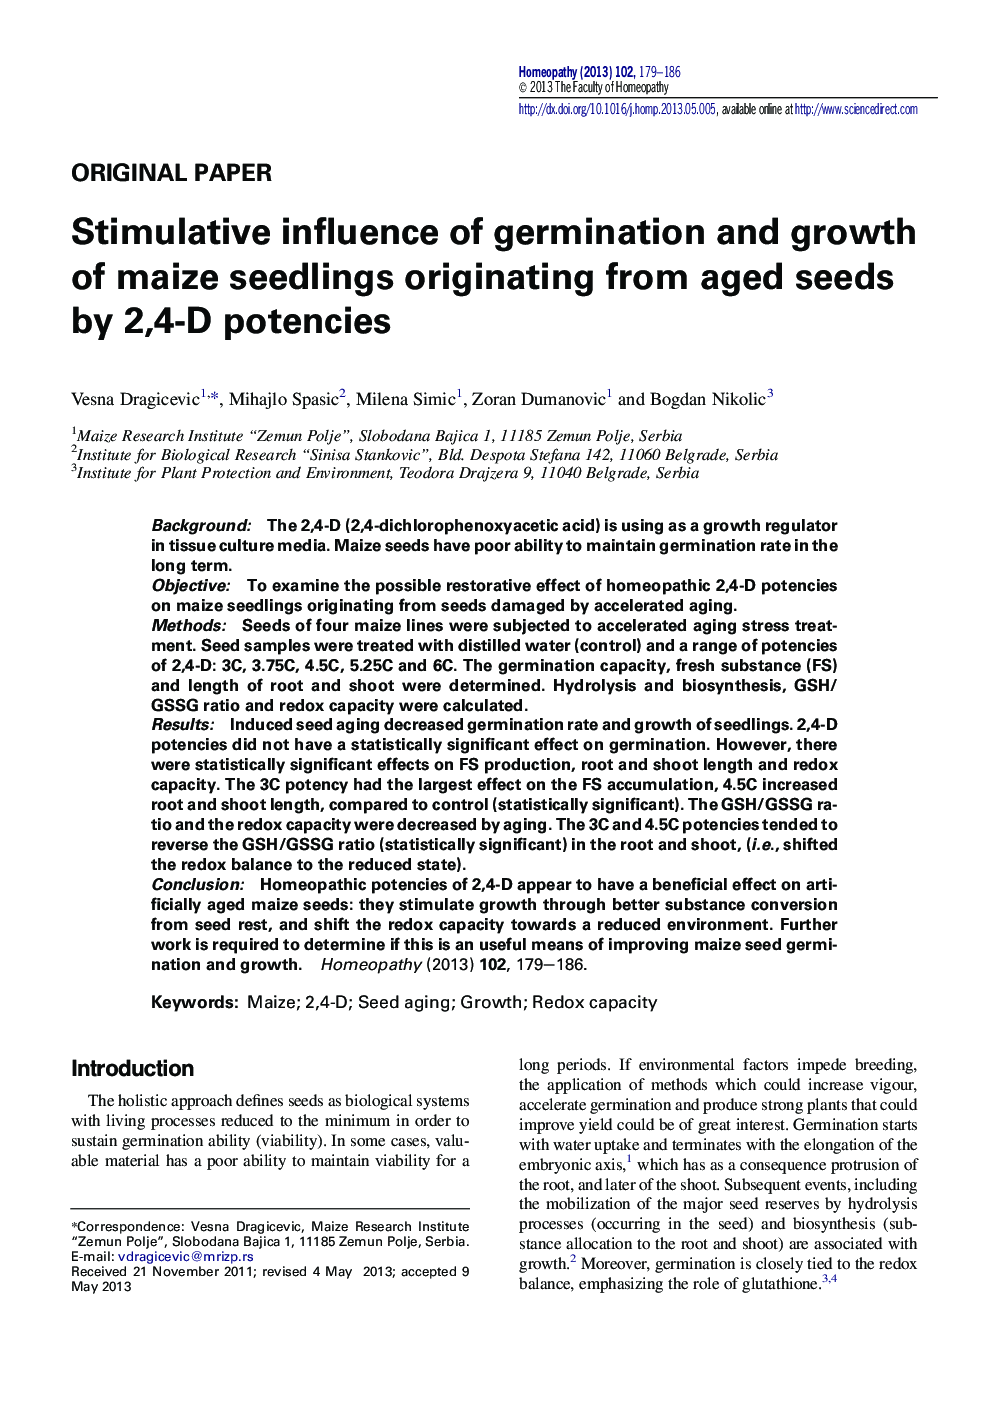 Stimulative influence of germination and growth of maize seedlings originating from aged seeds by 2,4-D potencies